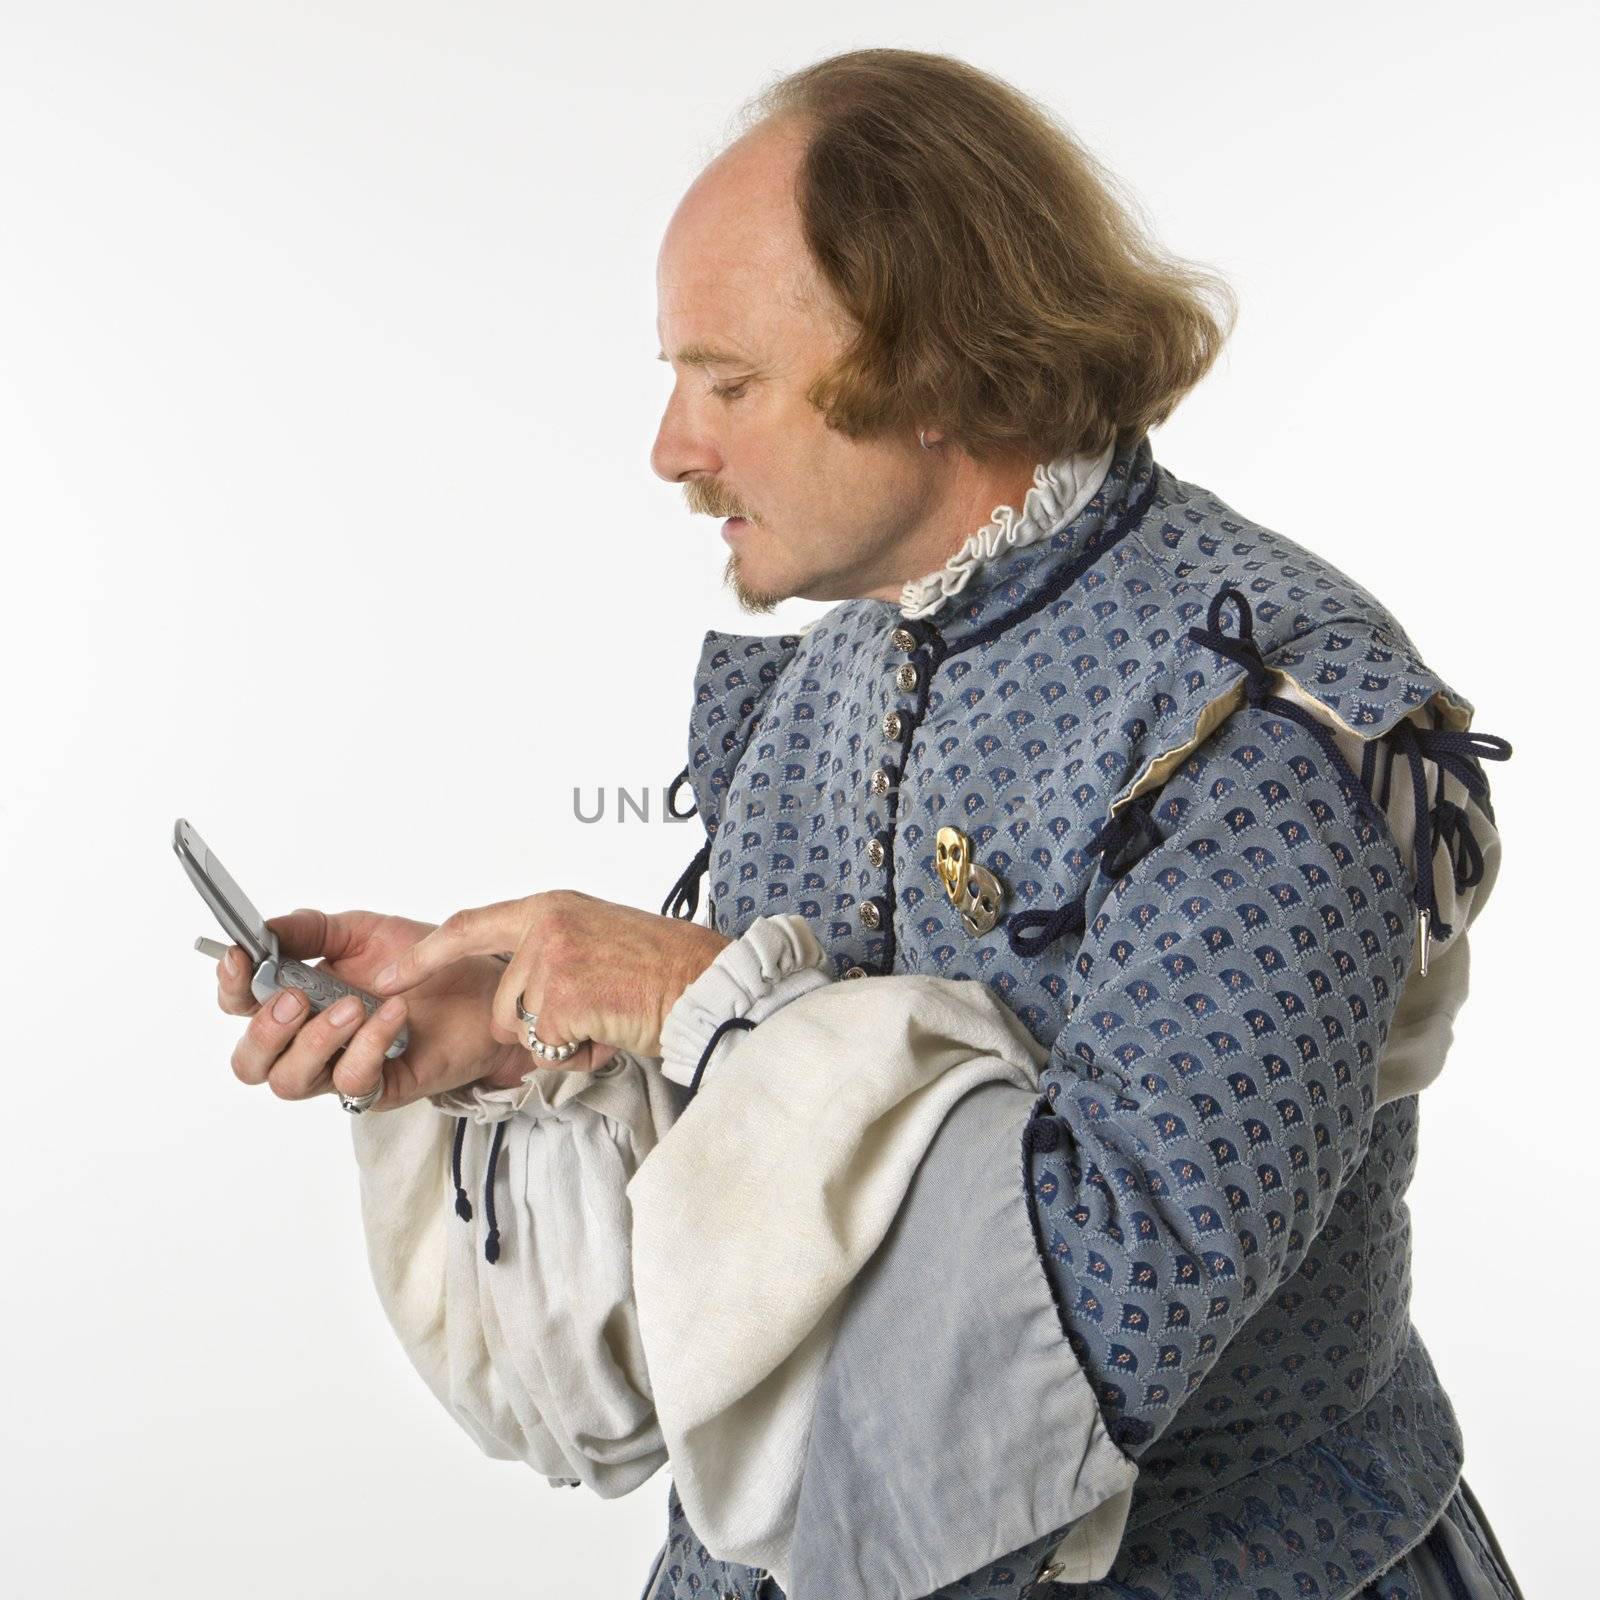 William Shakespeare in period clothing dialing cell phone.